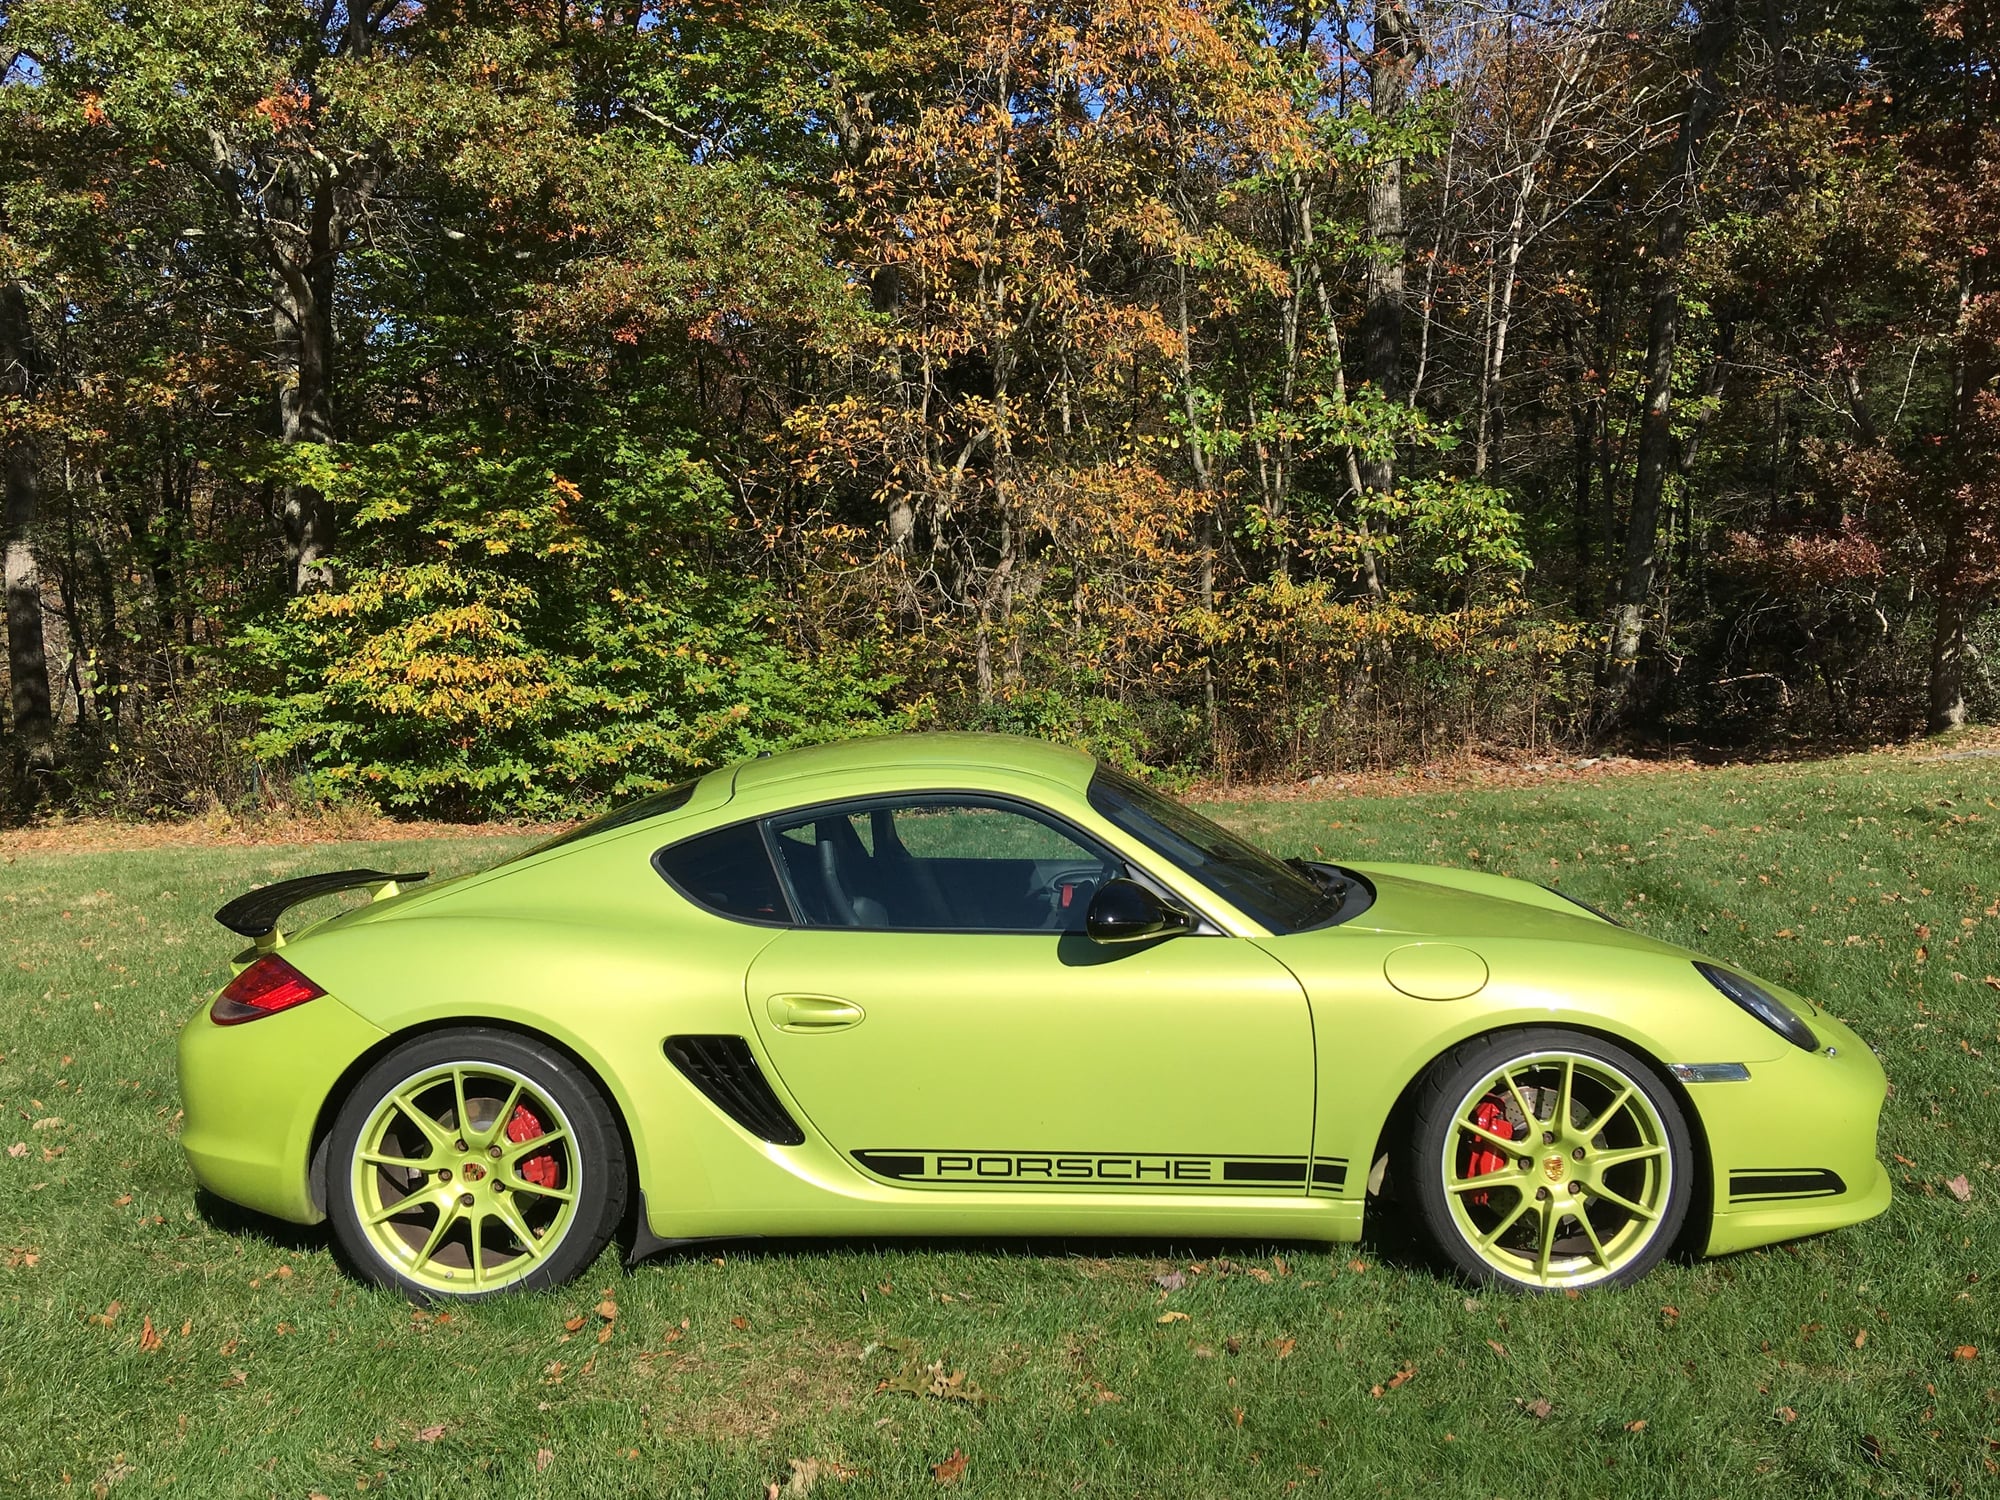 2012 Porsche Cayman - Peridot Cayman R - Used - VIN WP0AB2A82CS793079 - 53,000 Miles - 6 cyl - 2WD - Manual - Coupe - Other - Danbury, CT 06877, United States